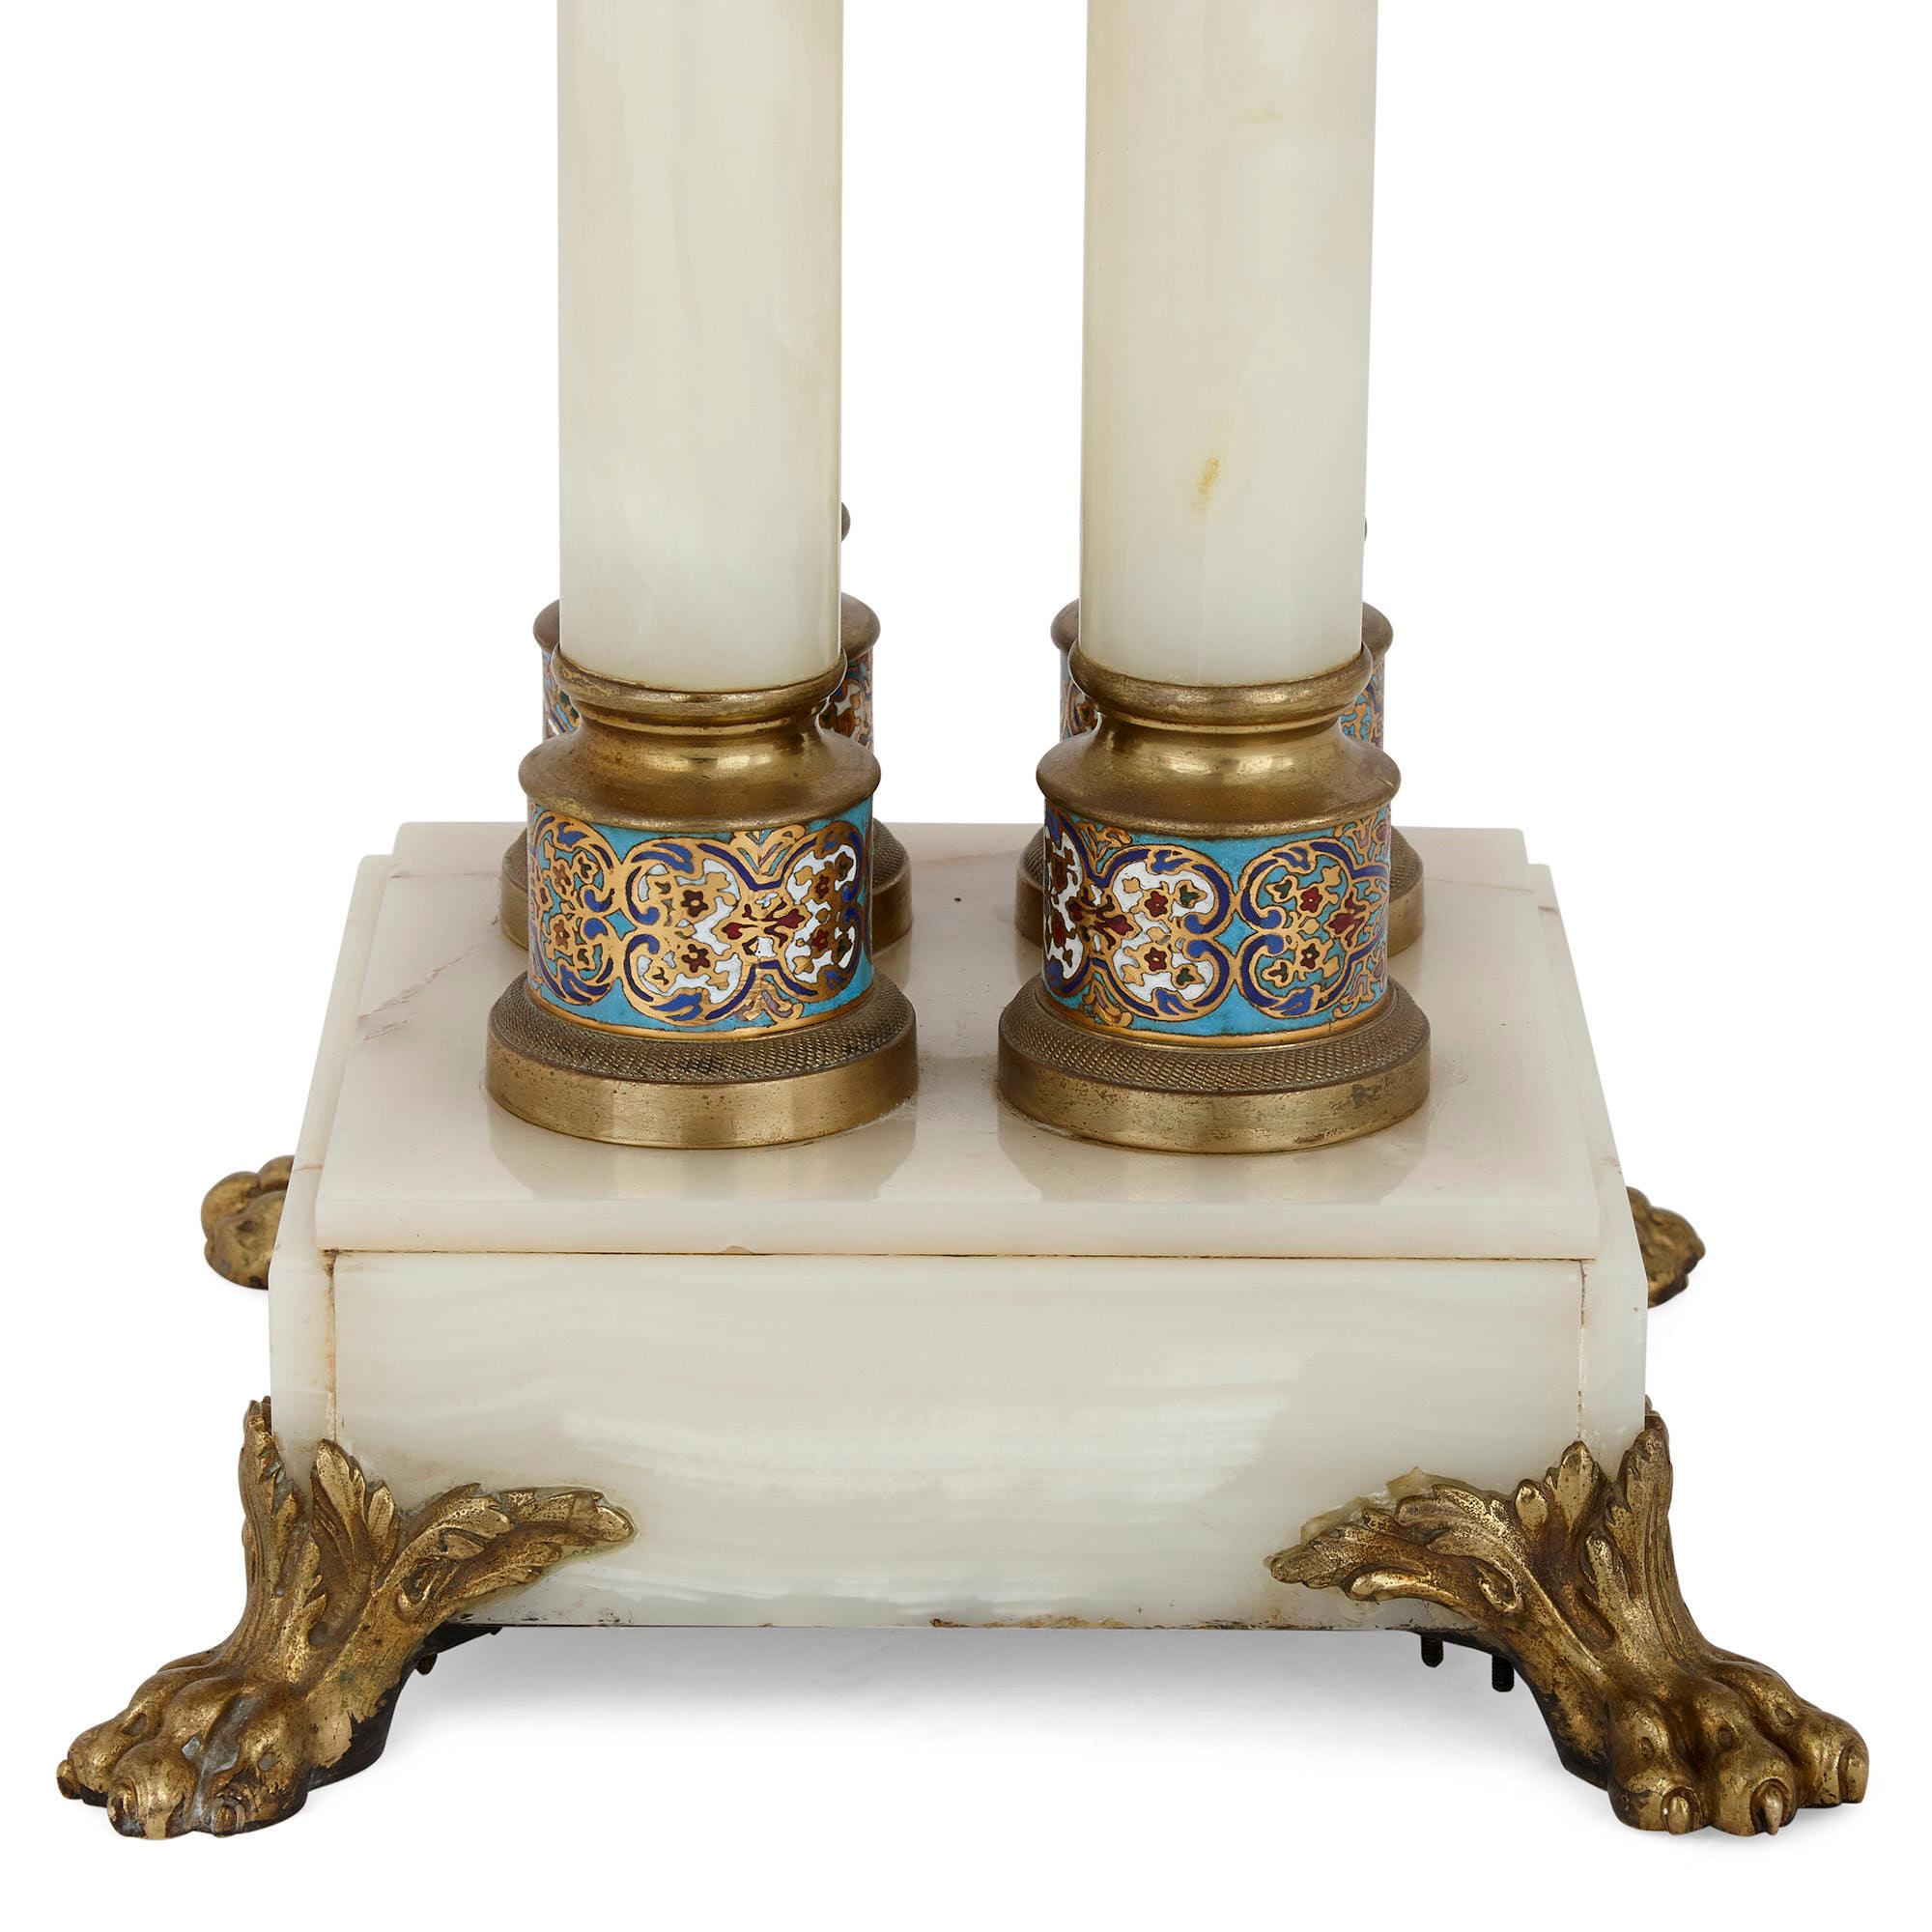 Champlevé and Cloisonné Enamel Mounted White Onyx and Gilt Bronze Table In Good Condition For Sale In London, GB